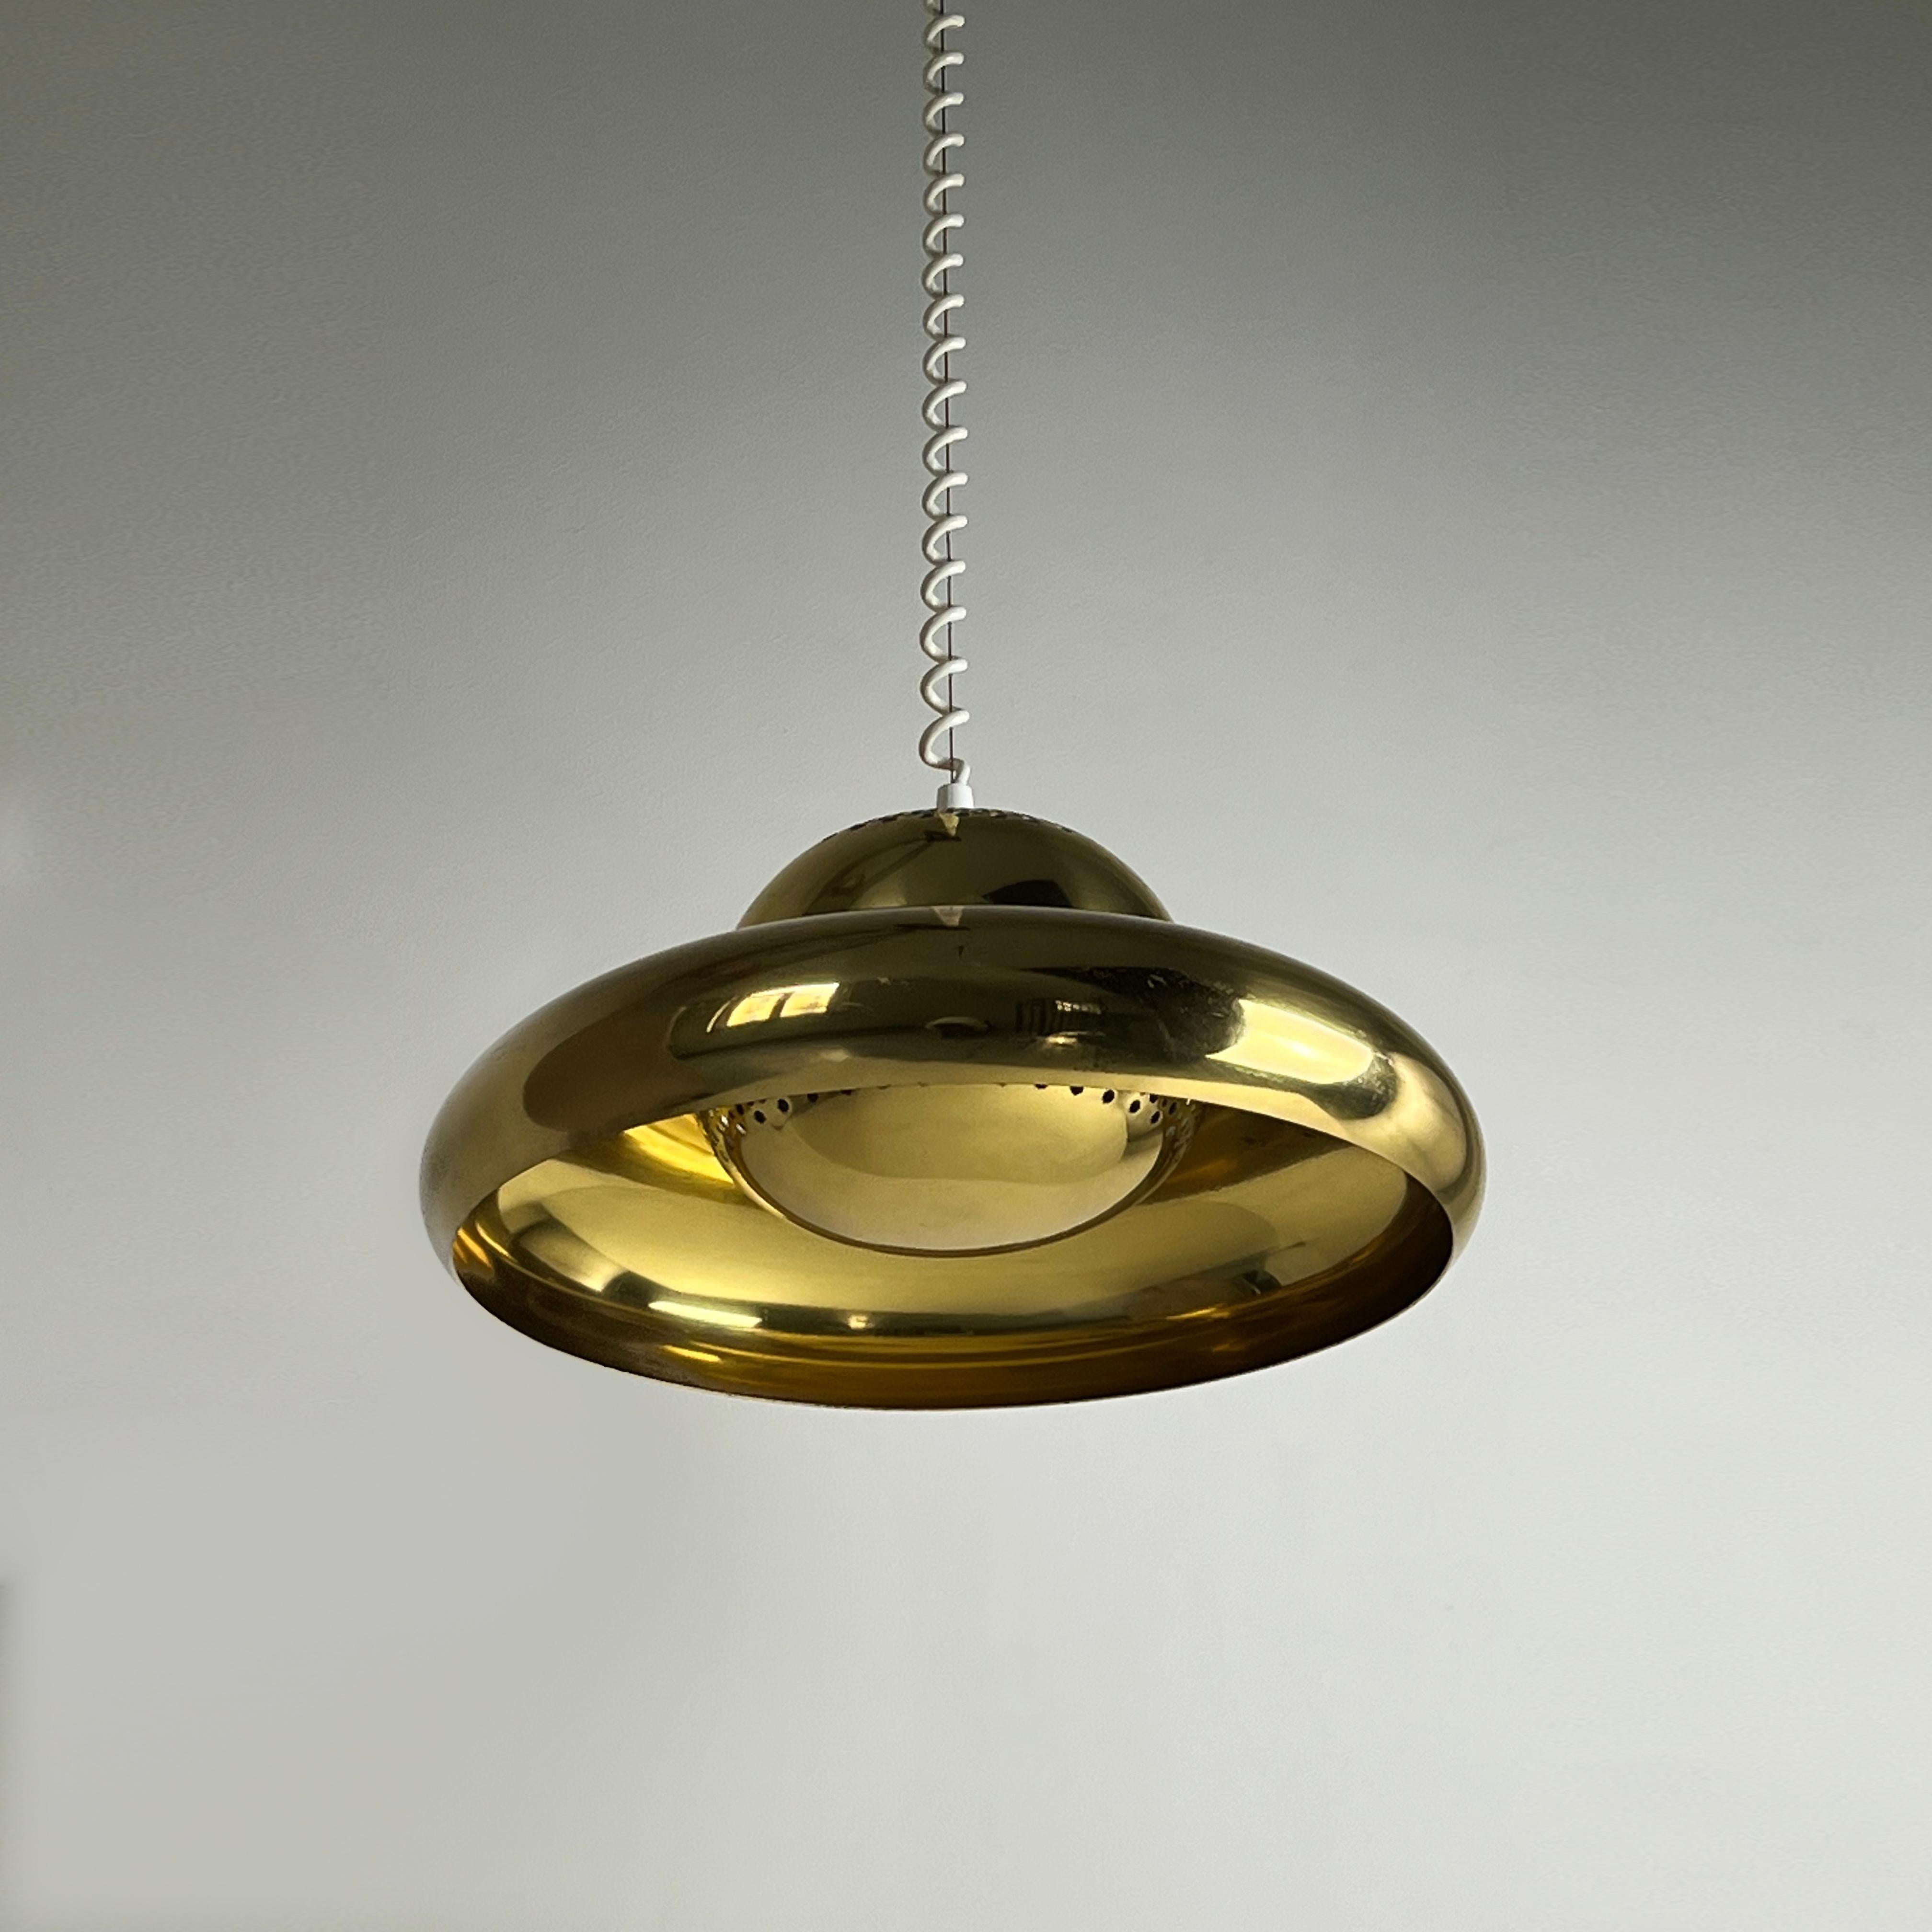 The Fior di Loto pendant, passionately conceived by the visionary minds of Tobia and Afra Scarpa, emerges as a true masterpiece within the realm of lighting design. Born in the creative crucible of 1963, it bears the prestigious imprint of Flos, the